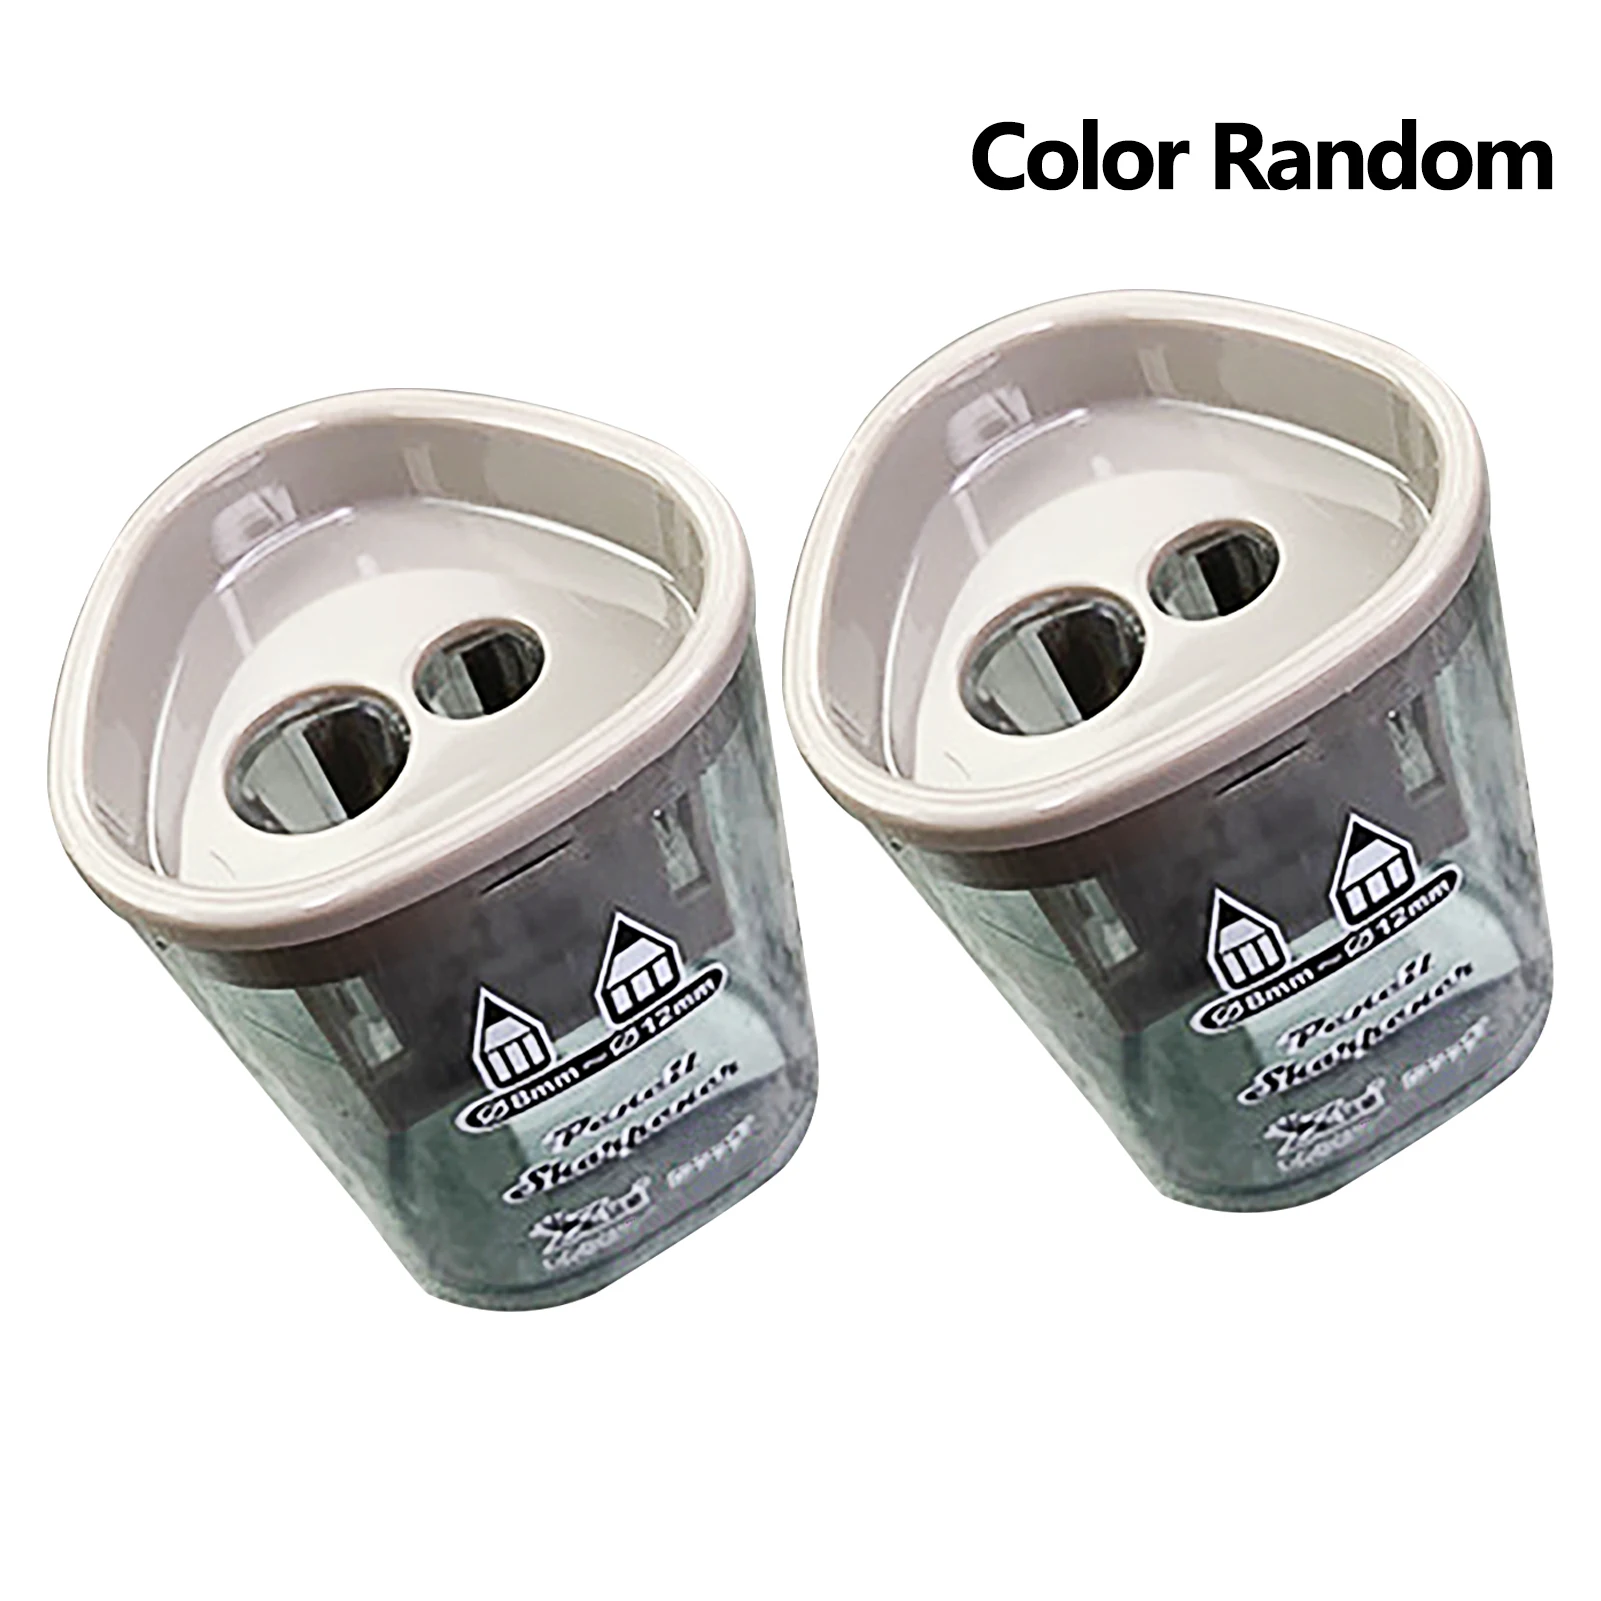 

2pcs Students Pencil Sharpener Portable With Container Durable Classroom Manual Dual Holes Random Color 8mm 12mm Kids Adults